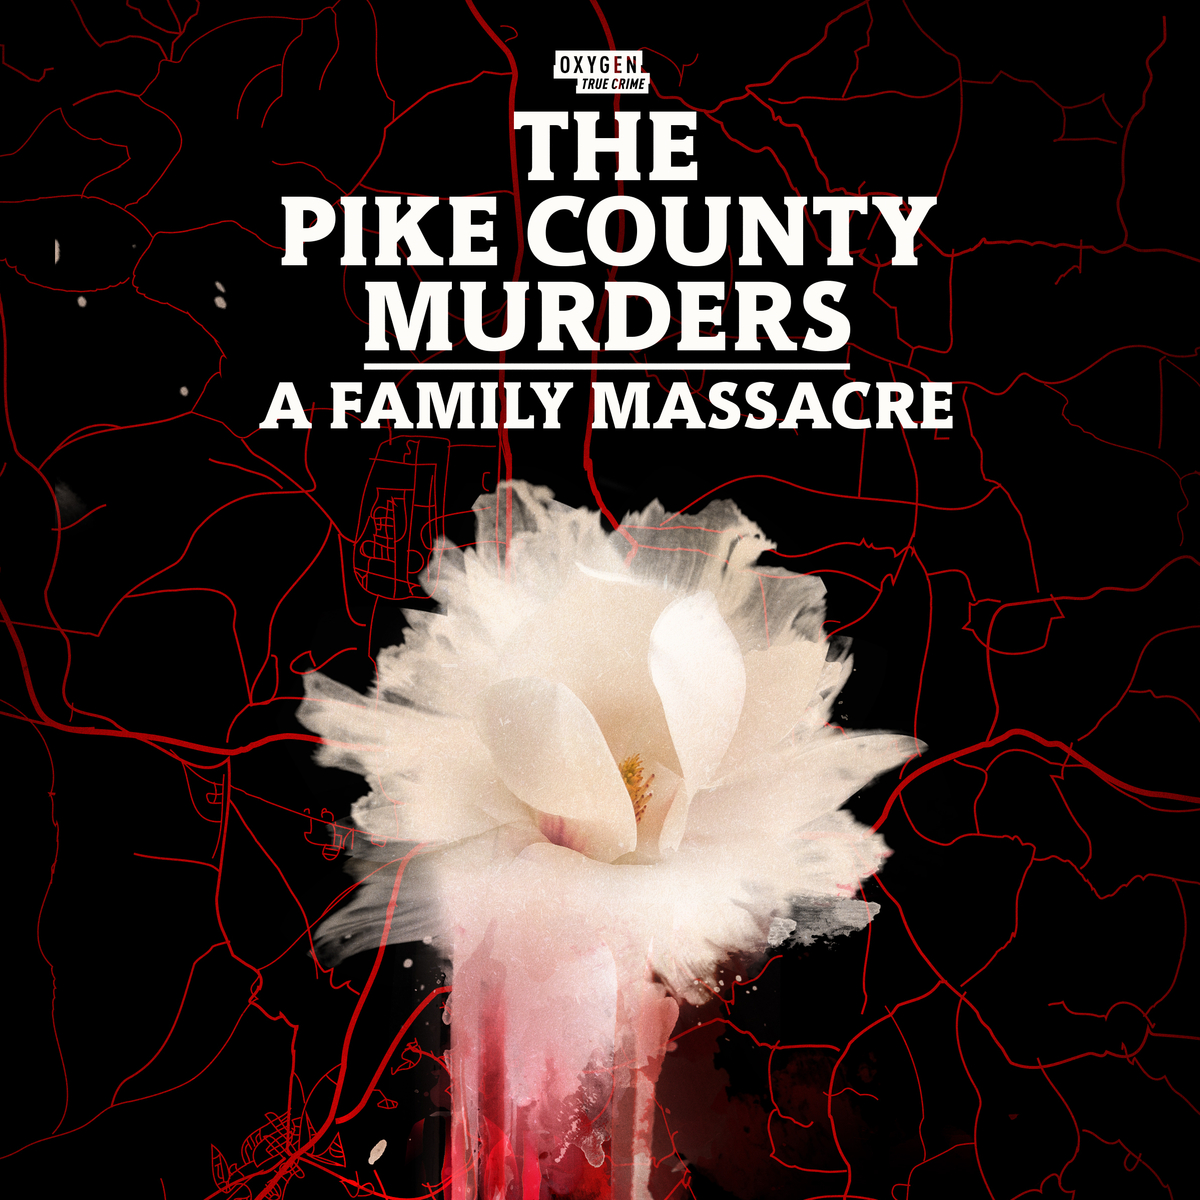 The Twisted Story of The Pike County Murders: A Family Massacre